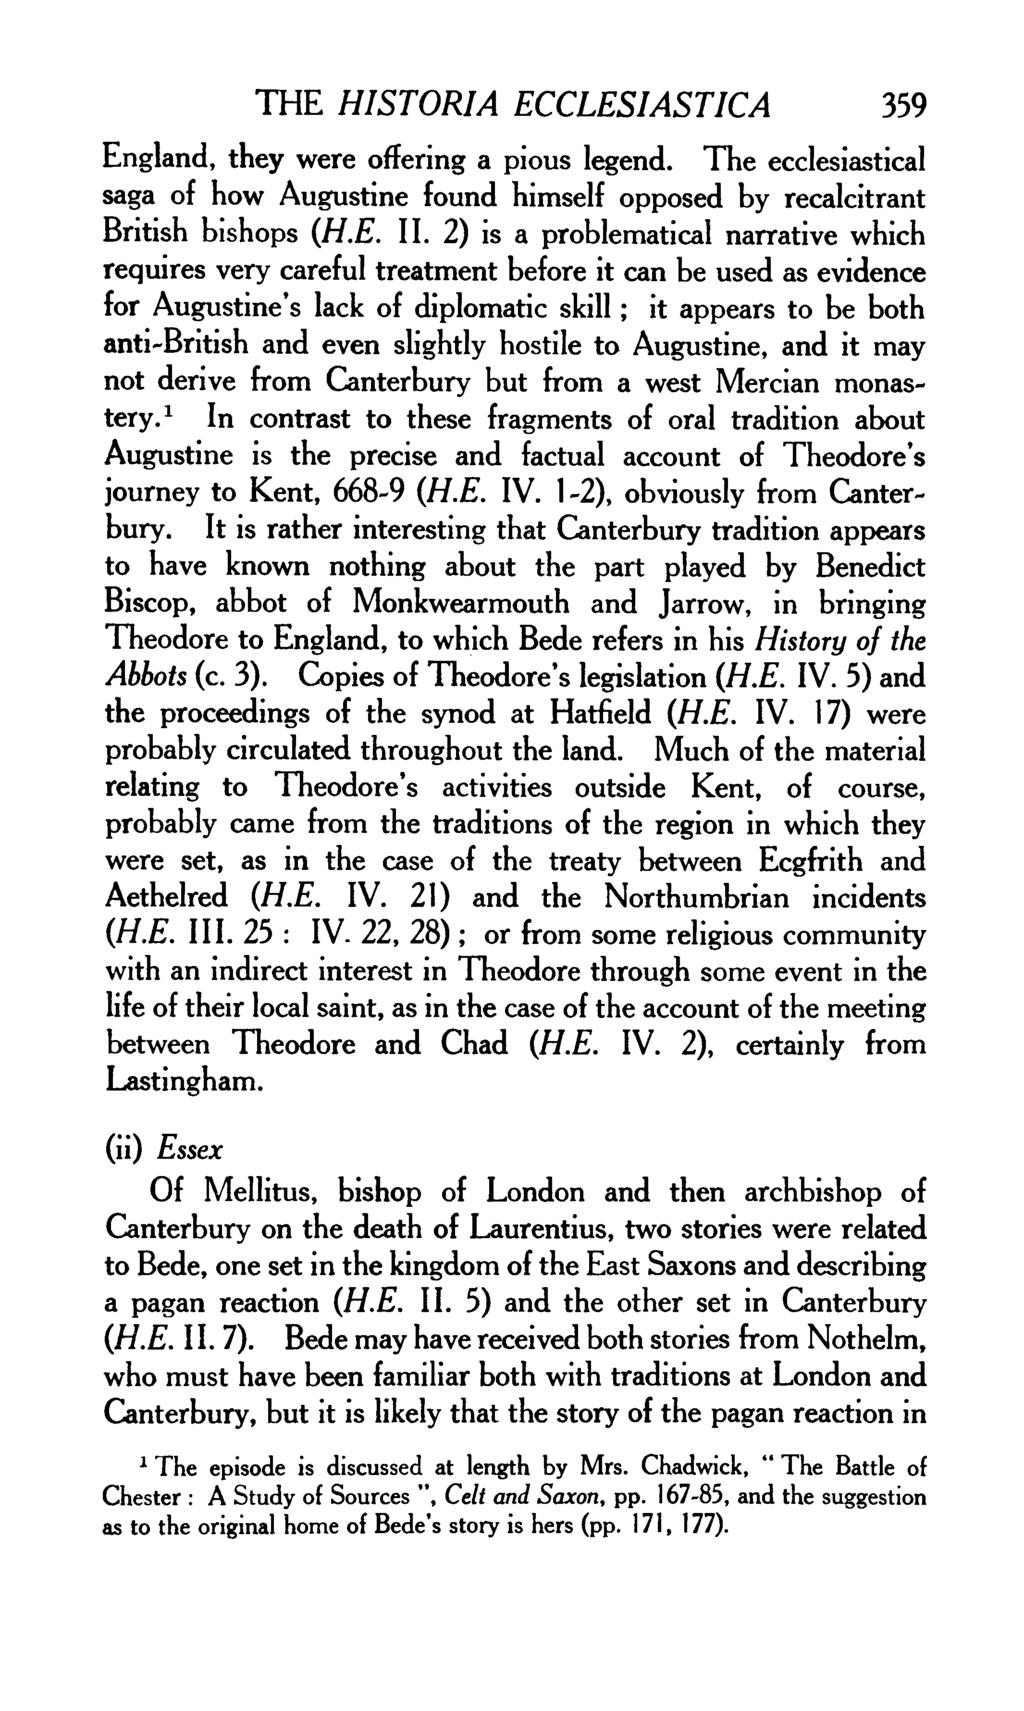 THE HISTORIA ECCLESIASTICA 359 England, they were offering a pious legend. The ecclesiastical saga of how Augustine found himself opposed by recalcitrant British bishops (H.E. II.